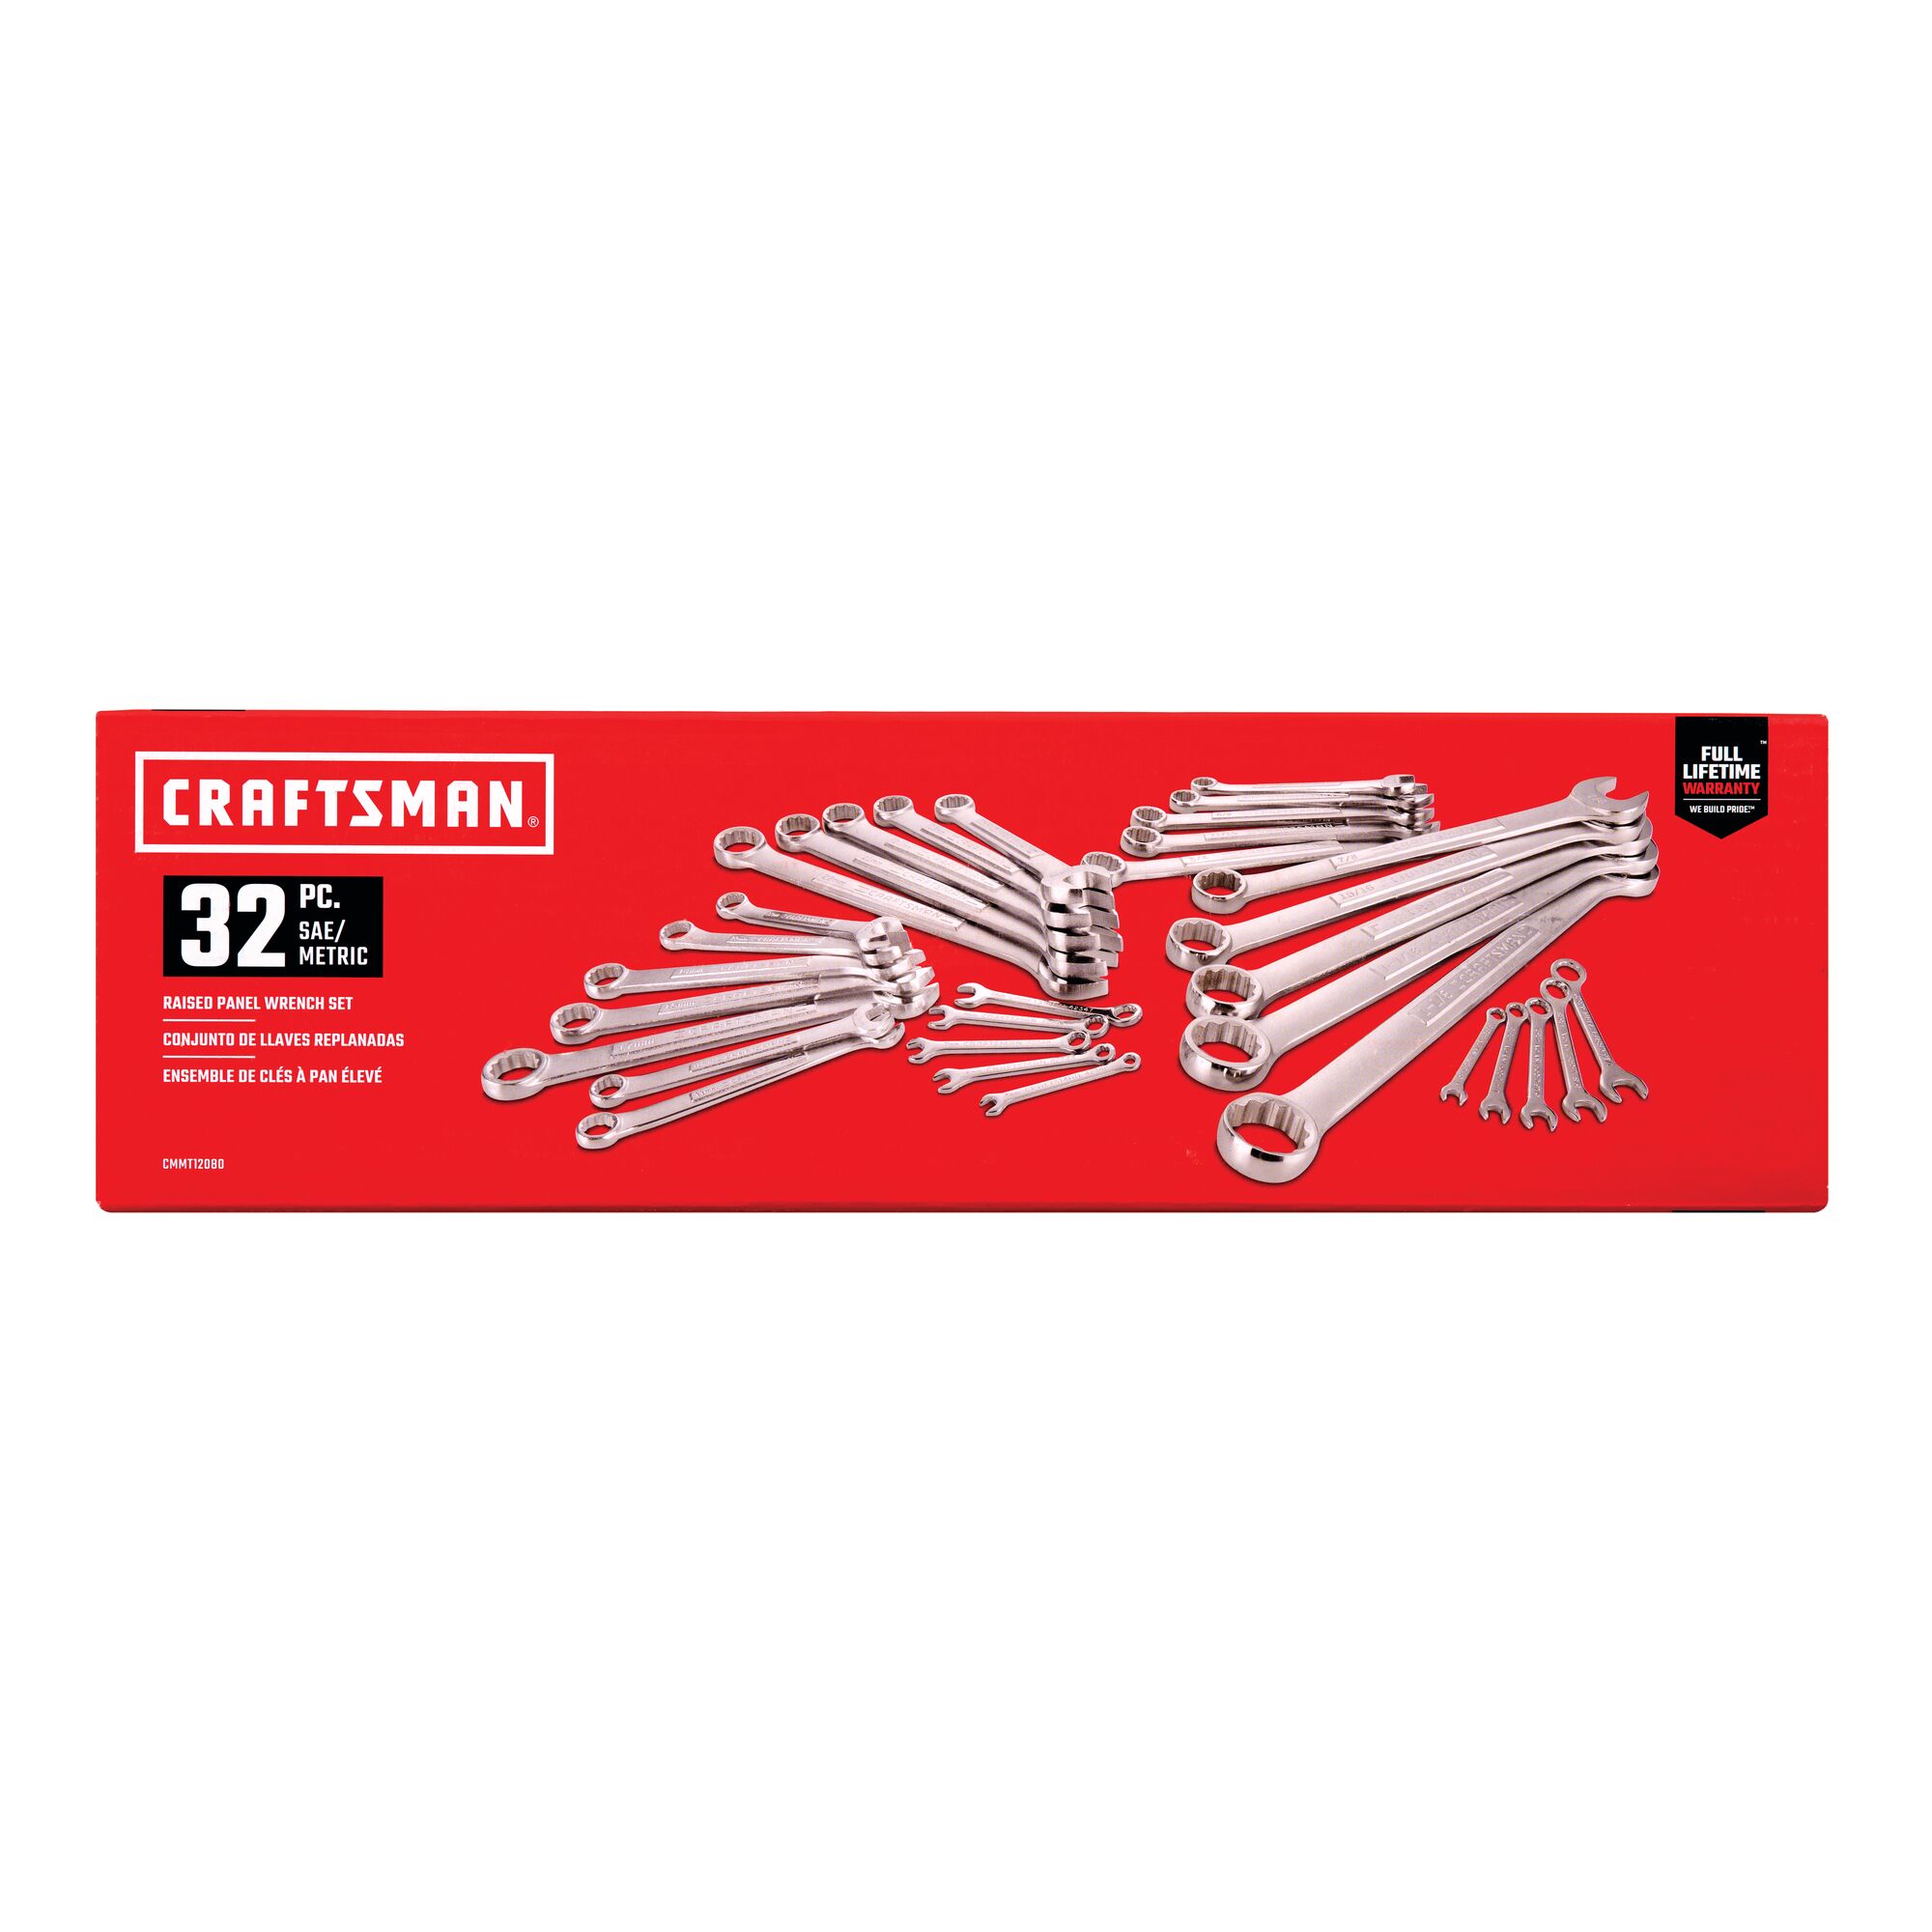 View of CRAFTSMAN Wrenches: Set packaging